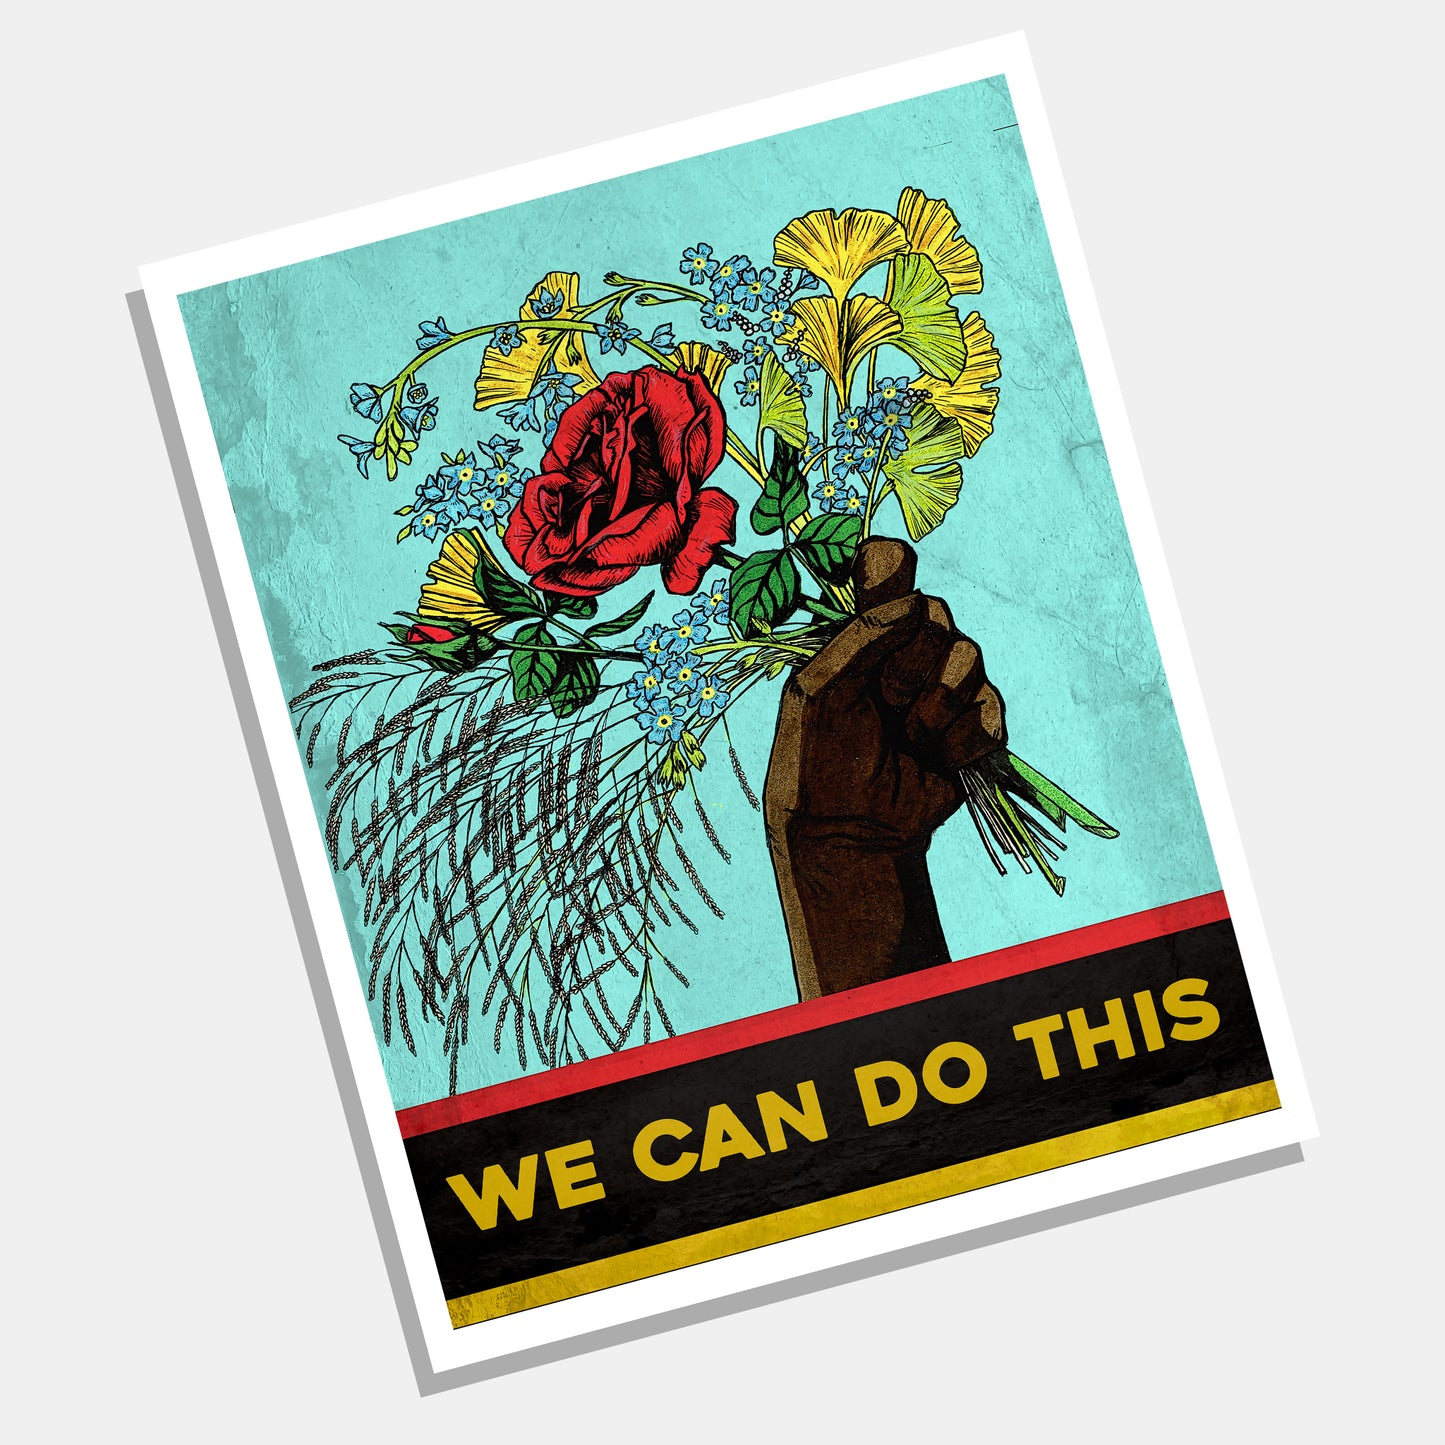 Athens Banner Project: Archival Print of "We Can Do This" by Joey Dunlap - by Joey Dunlap - K. A. Artist Shop